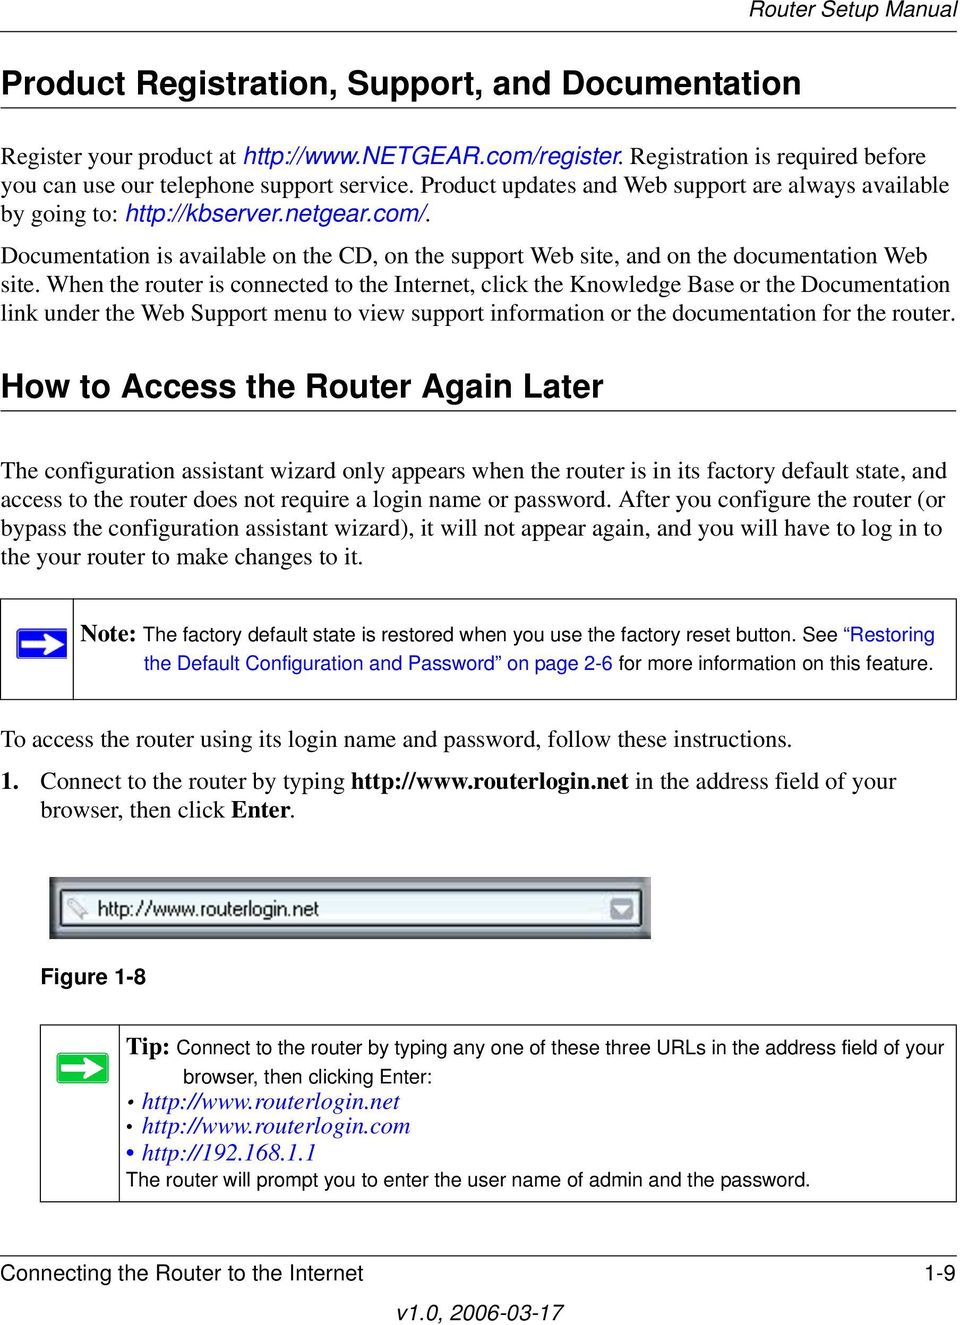 When the router is connected to the Internet, click the Knowledge Base or the Documentation link under the Web Support menu to view support information or the documentation for the router.